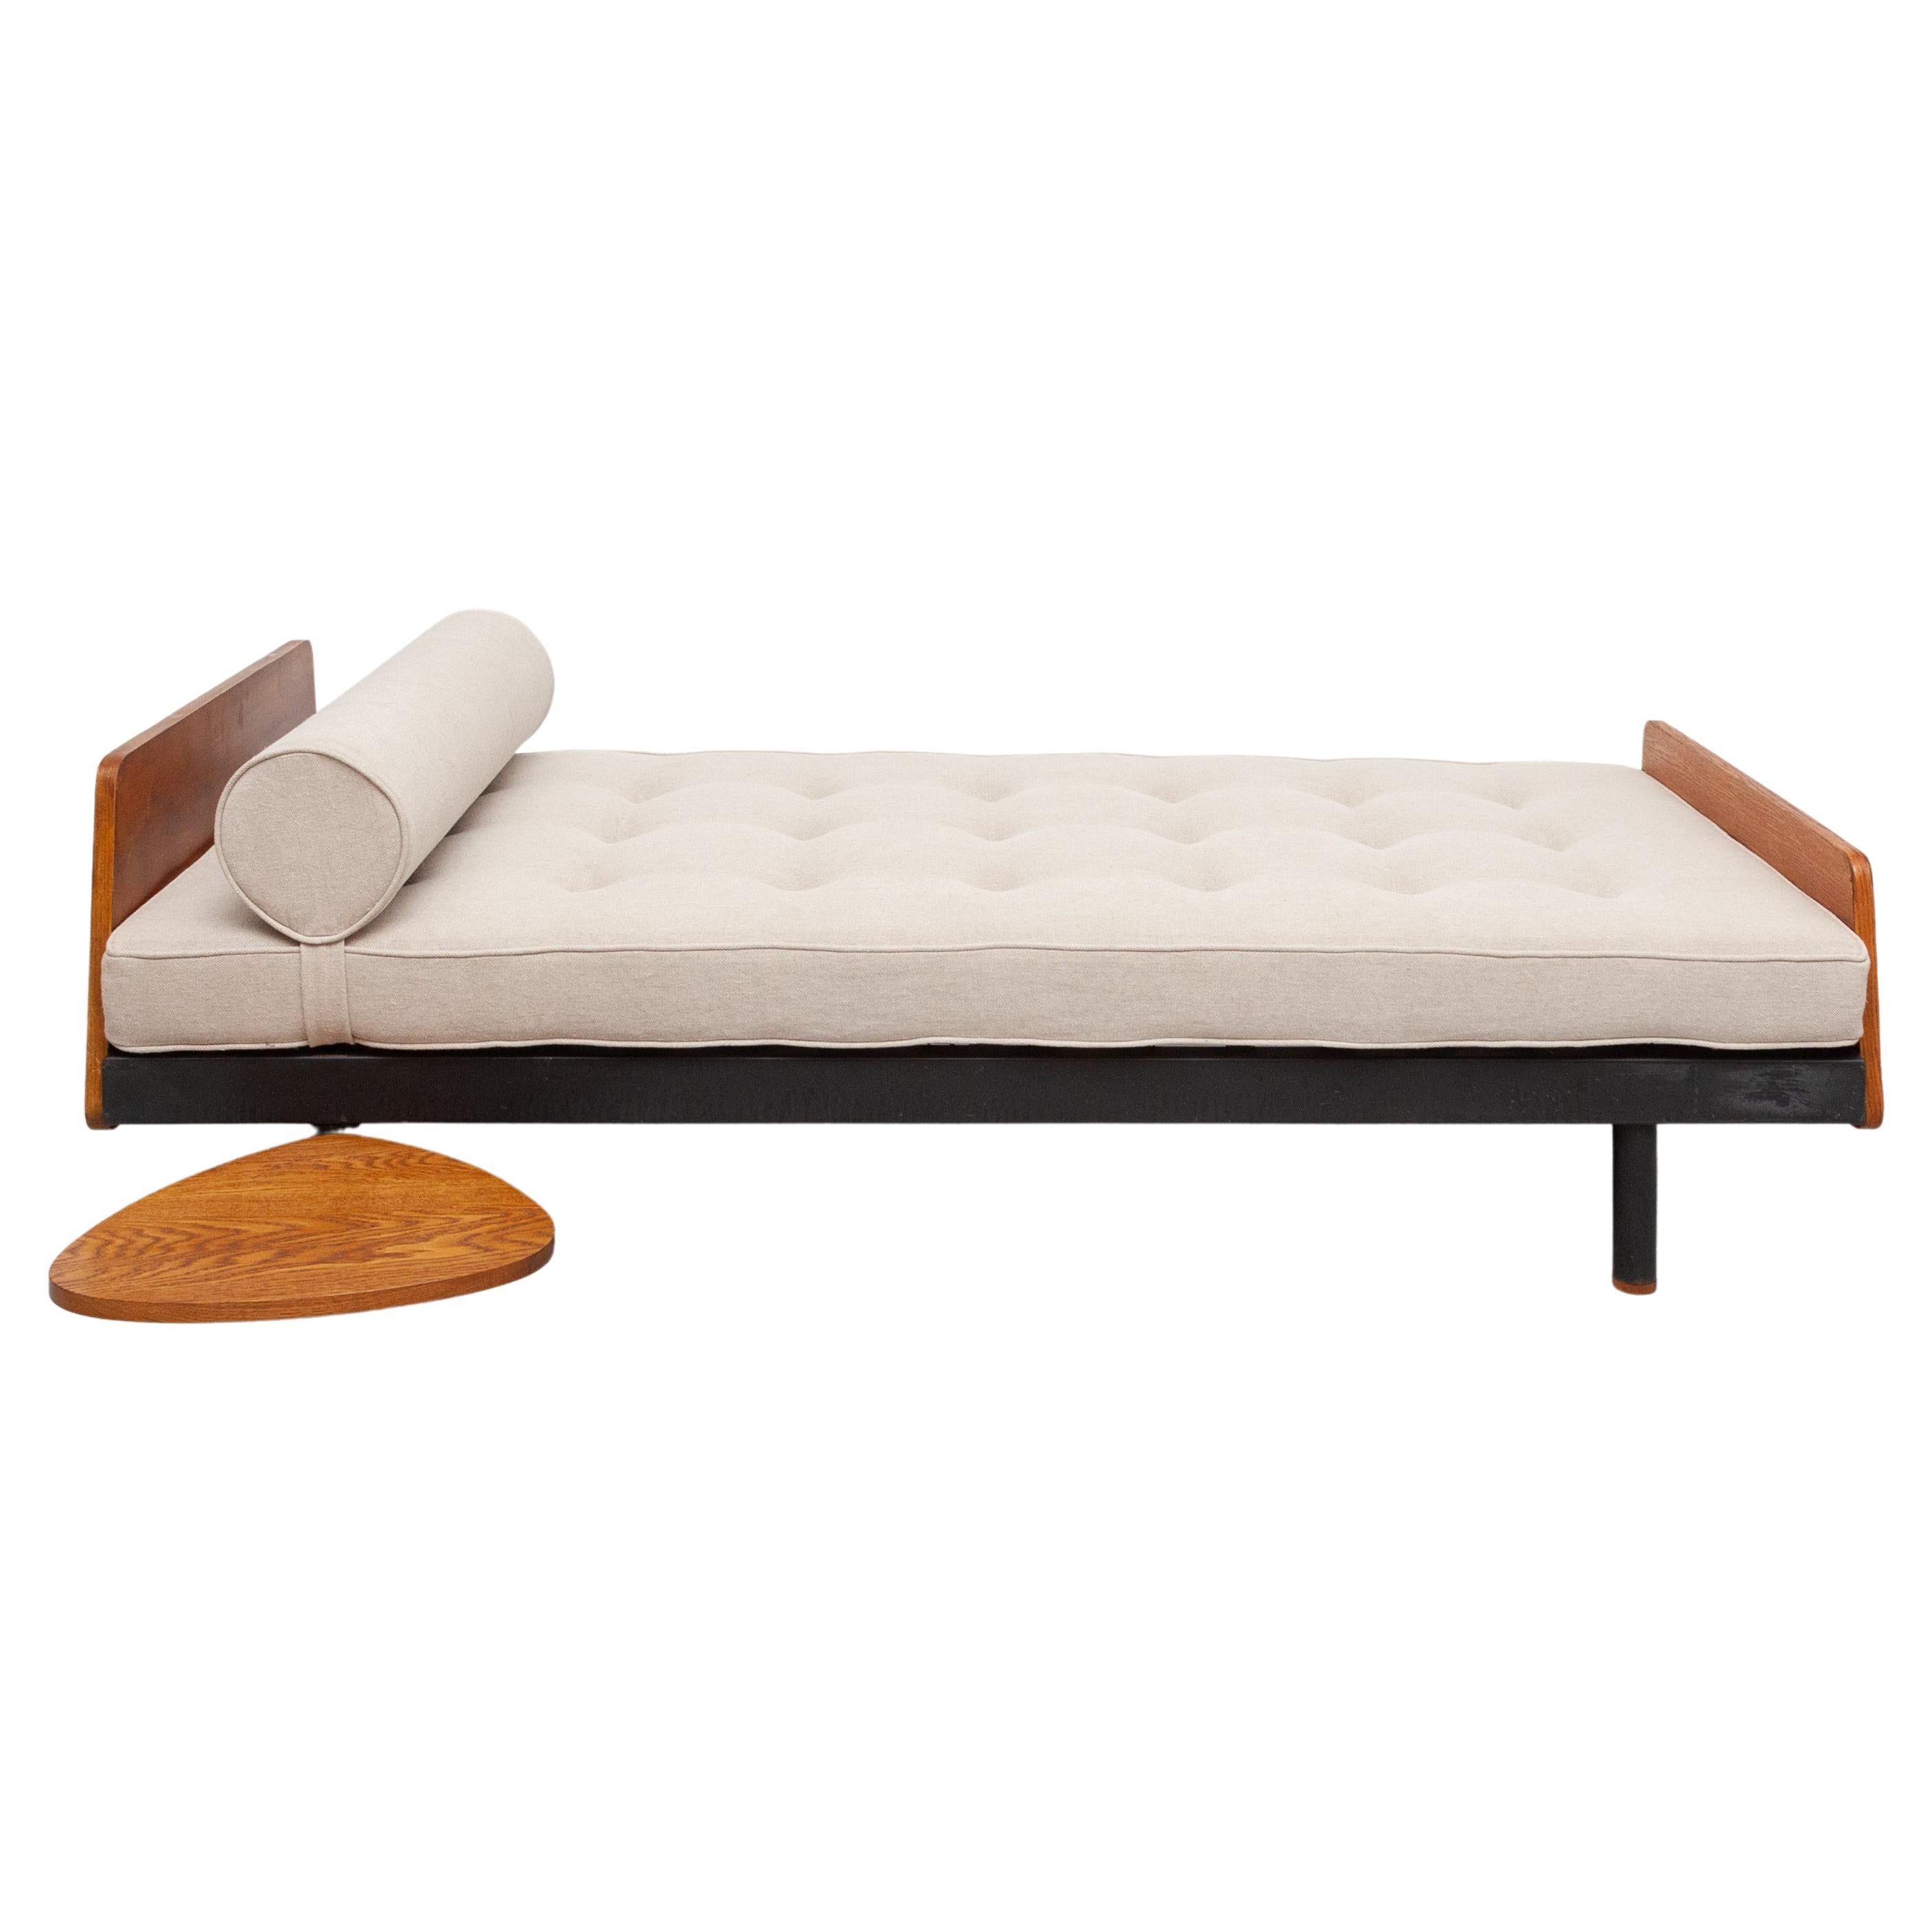 Jean Prouve Mid-Century Modern S.C.A.L. Daybed, circa 1950